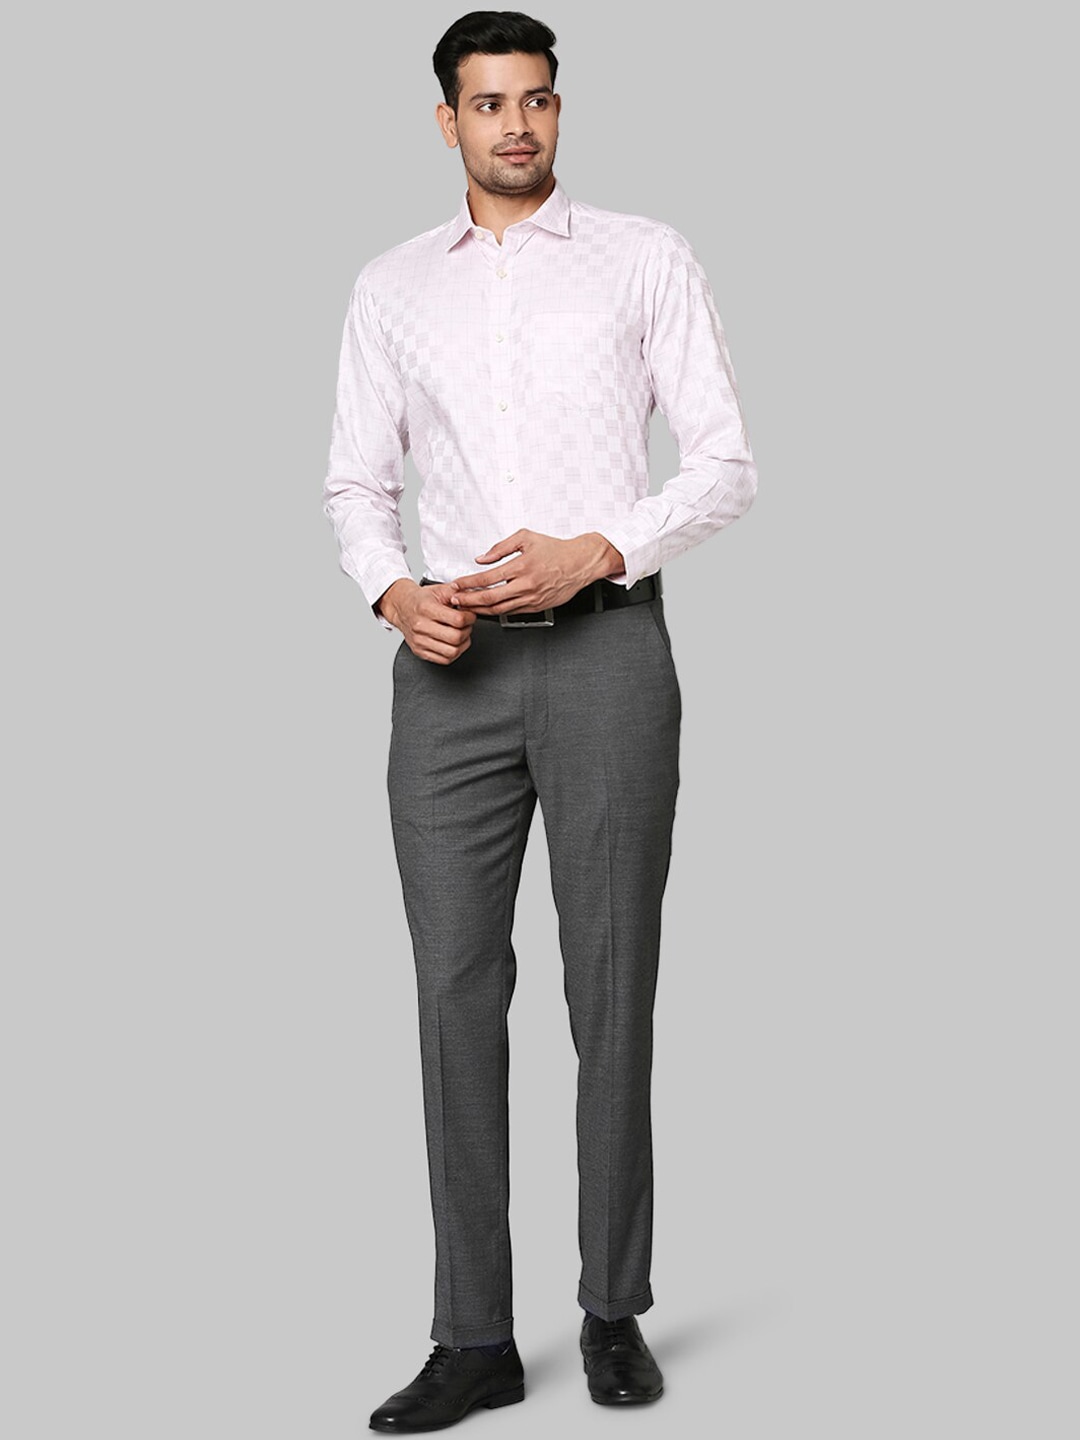 Trousers brand in India - Park Avenue